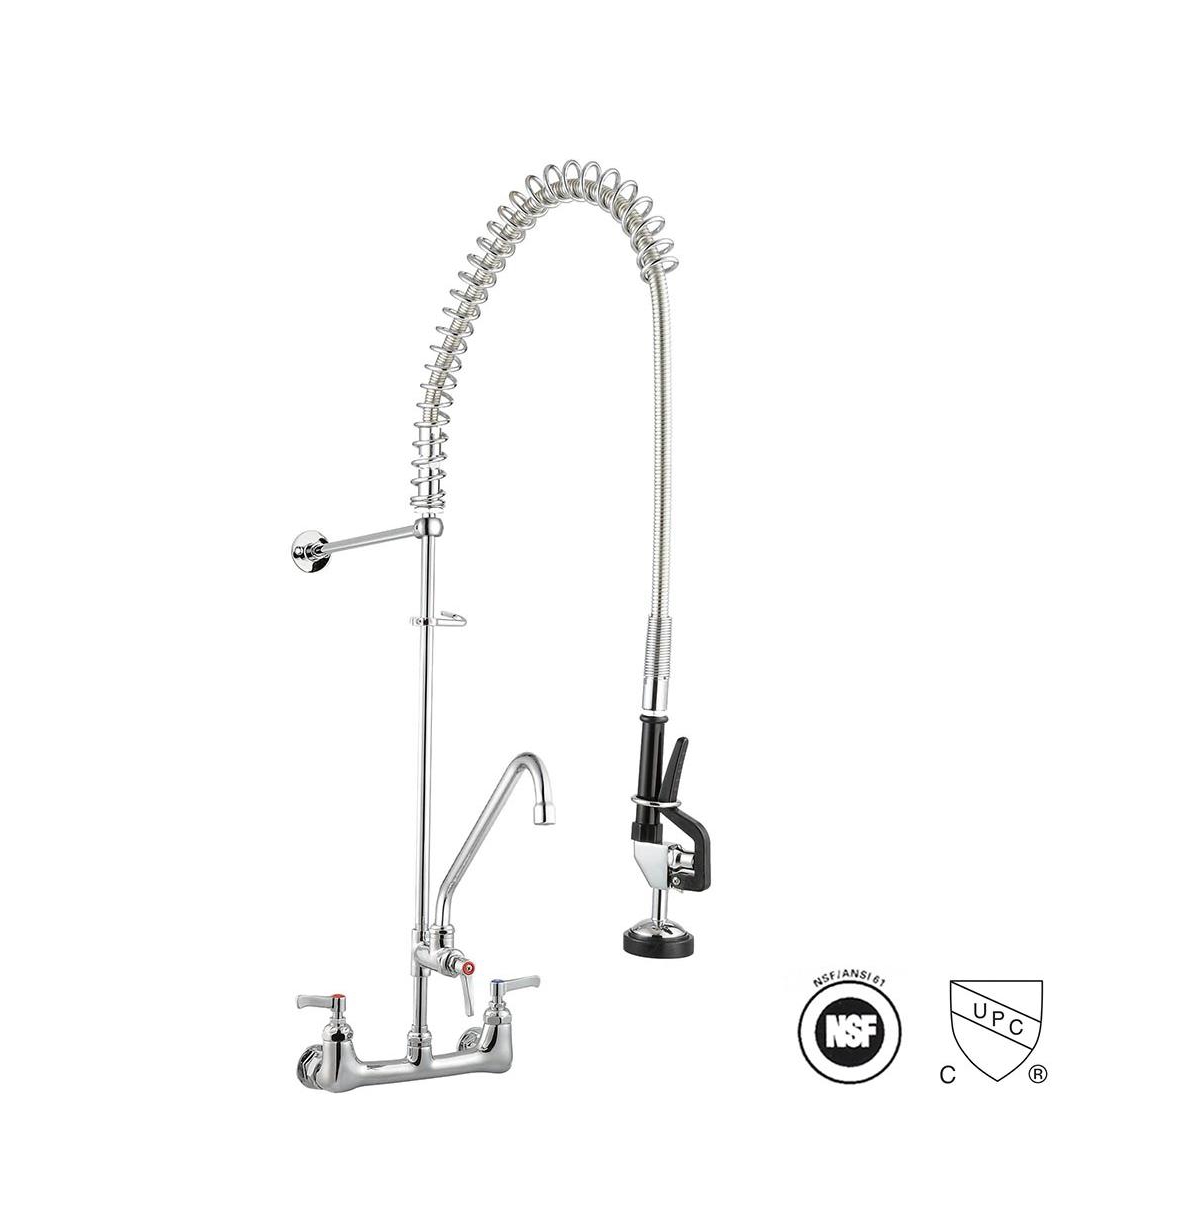 Aquaterior Pre-Rinse Brass Wall-mount Faucet w/ 12" Add-On Faucet Restaurant Cupc Nsf - Silver